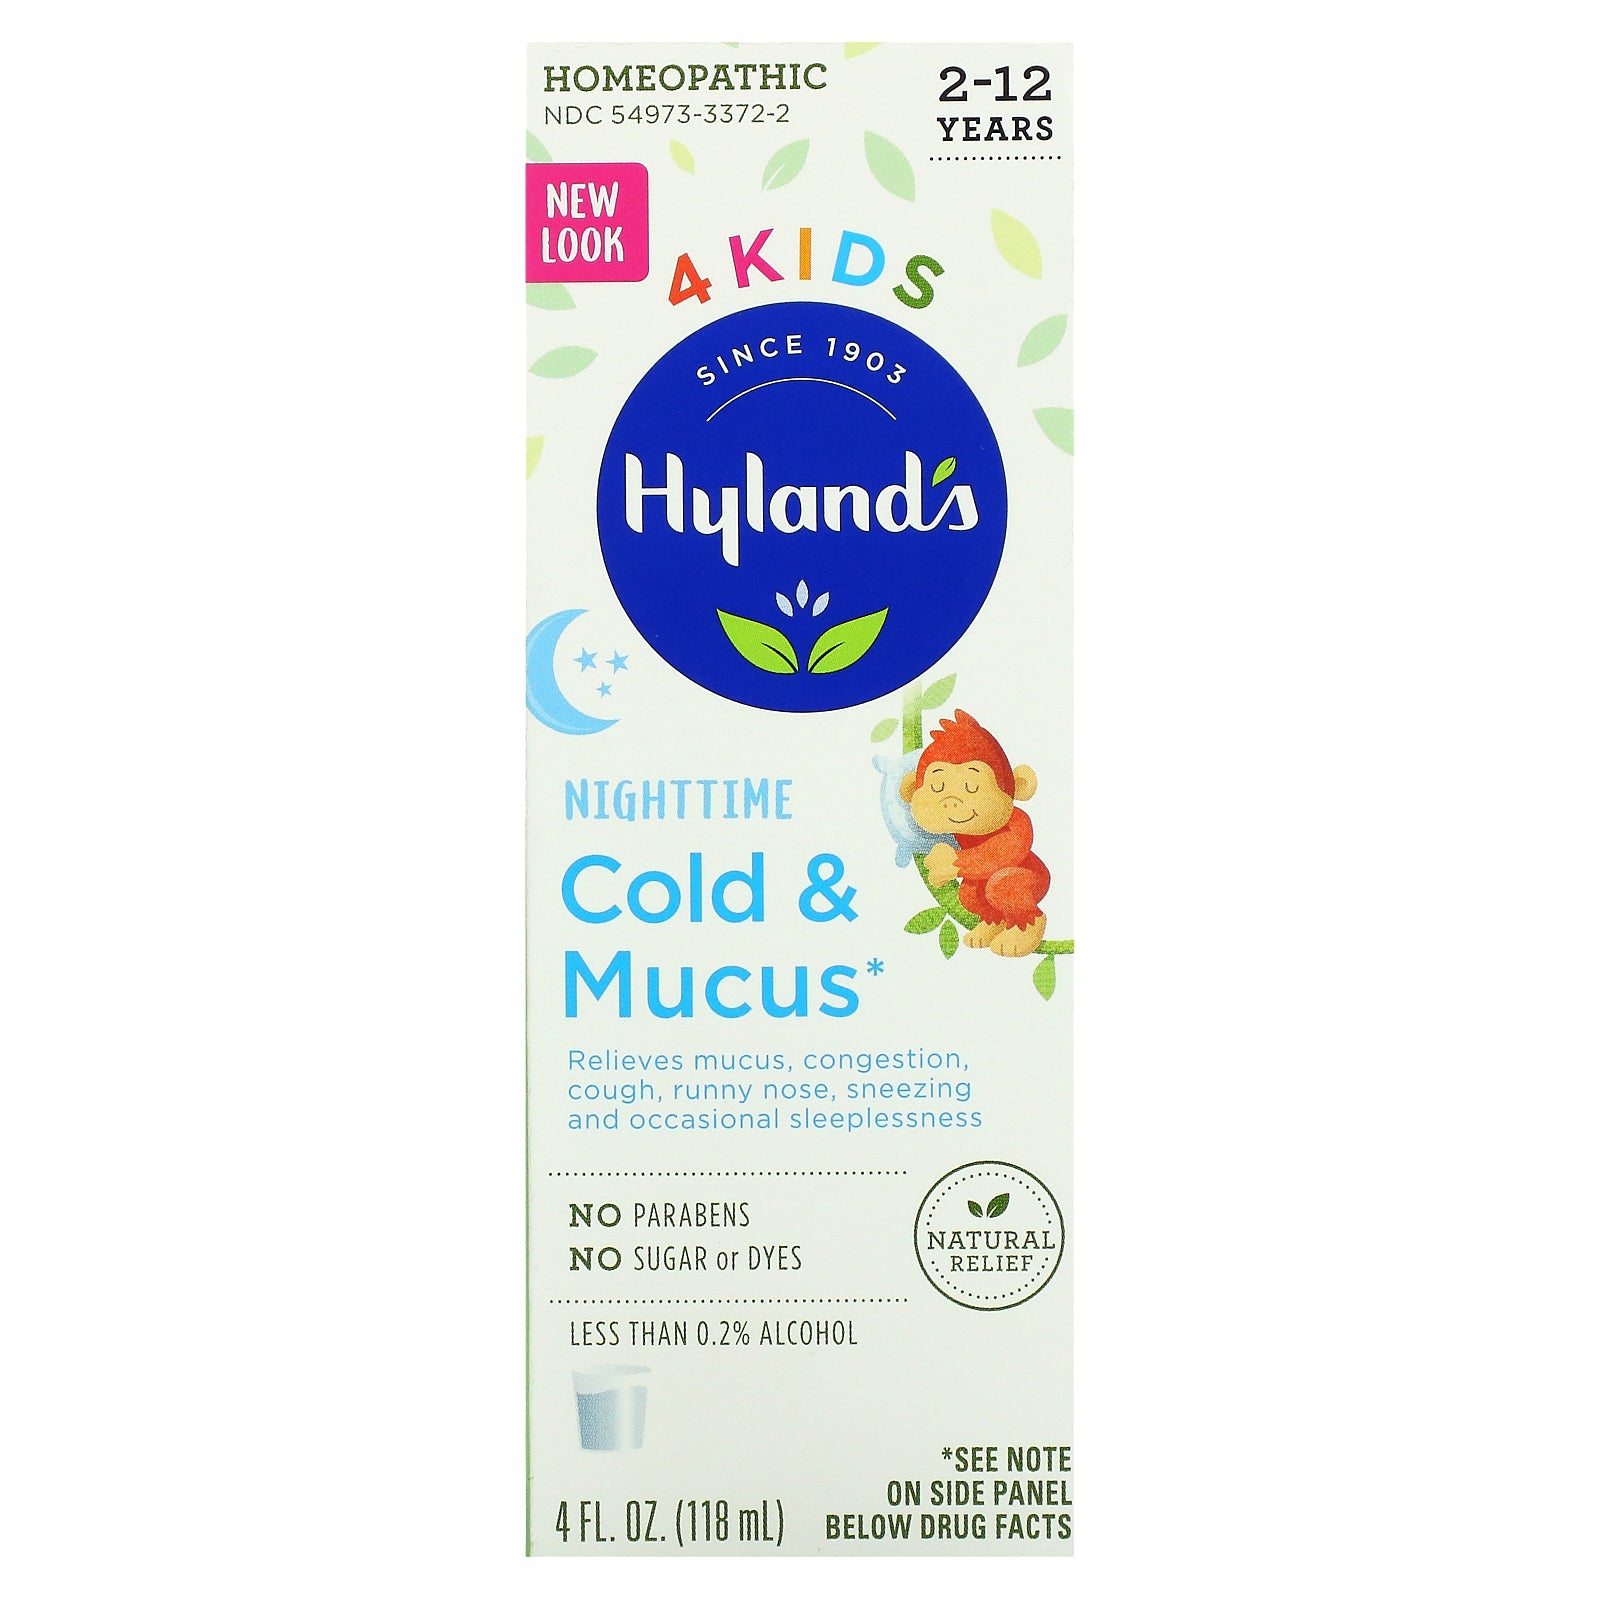 Hyland's, 4 Kids, Cold & Mucus, Nighttime, Ages 2-12